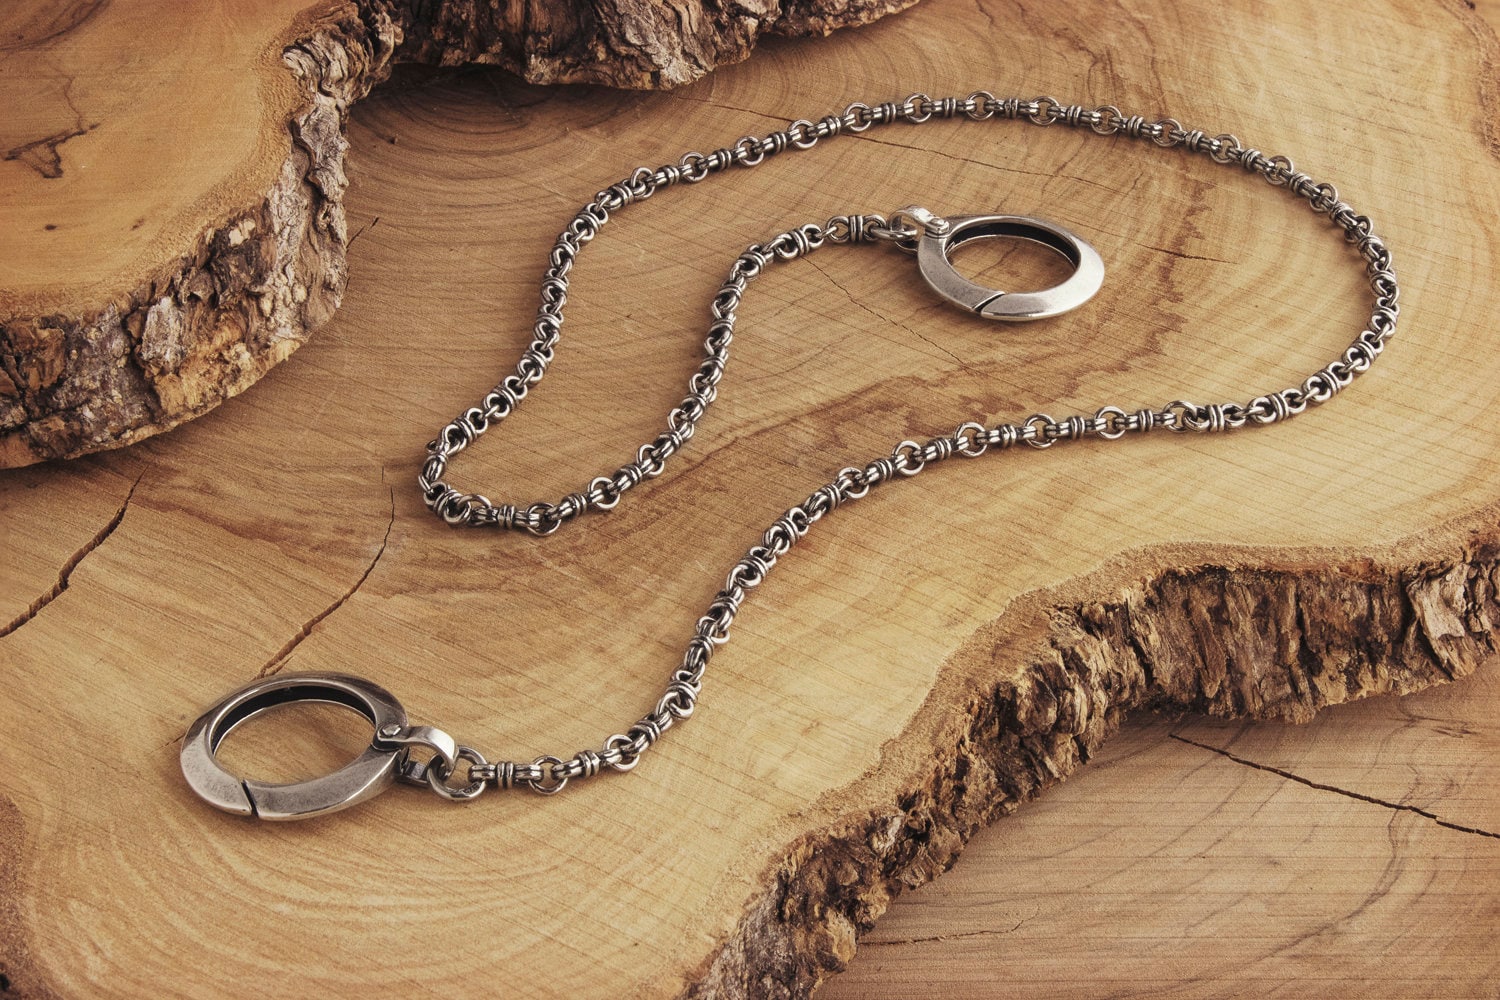 Silvertraits Thick Wheat Wallet Chain Made of Sterling Silver